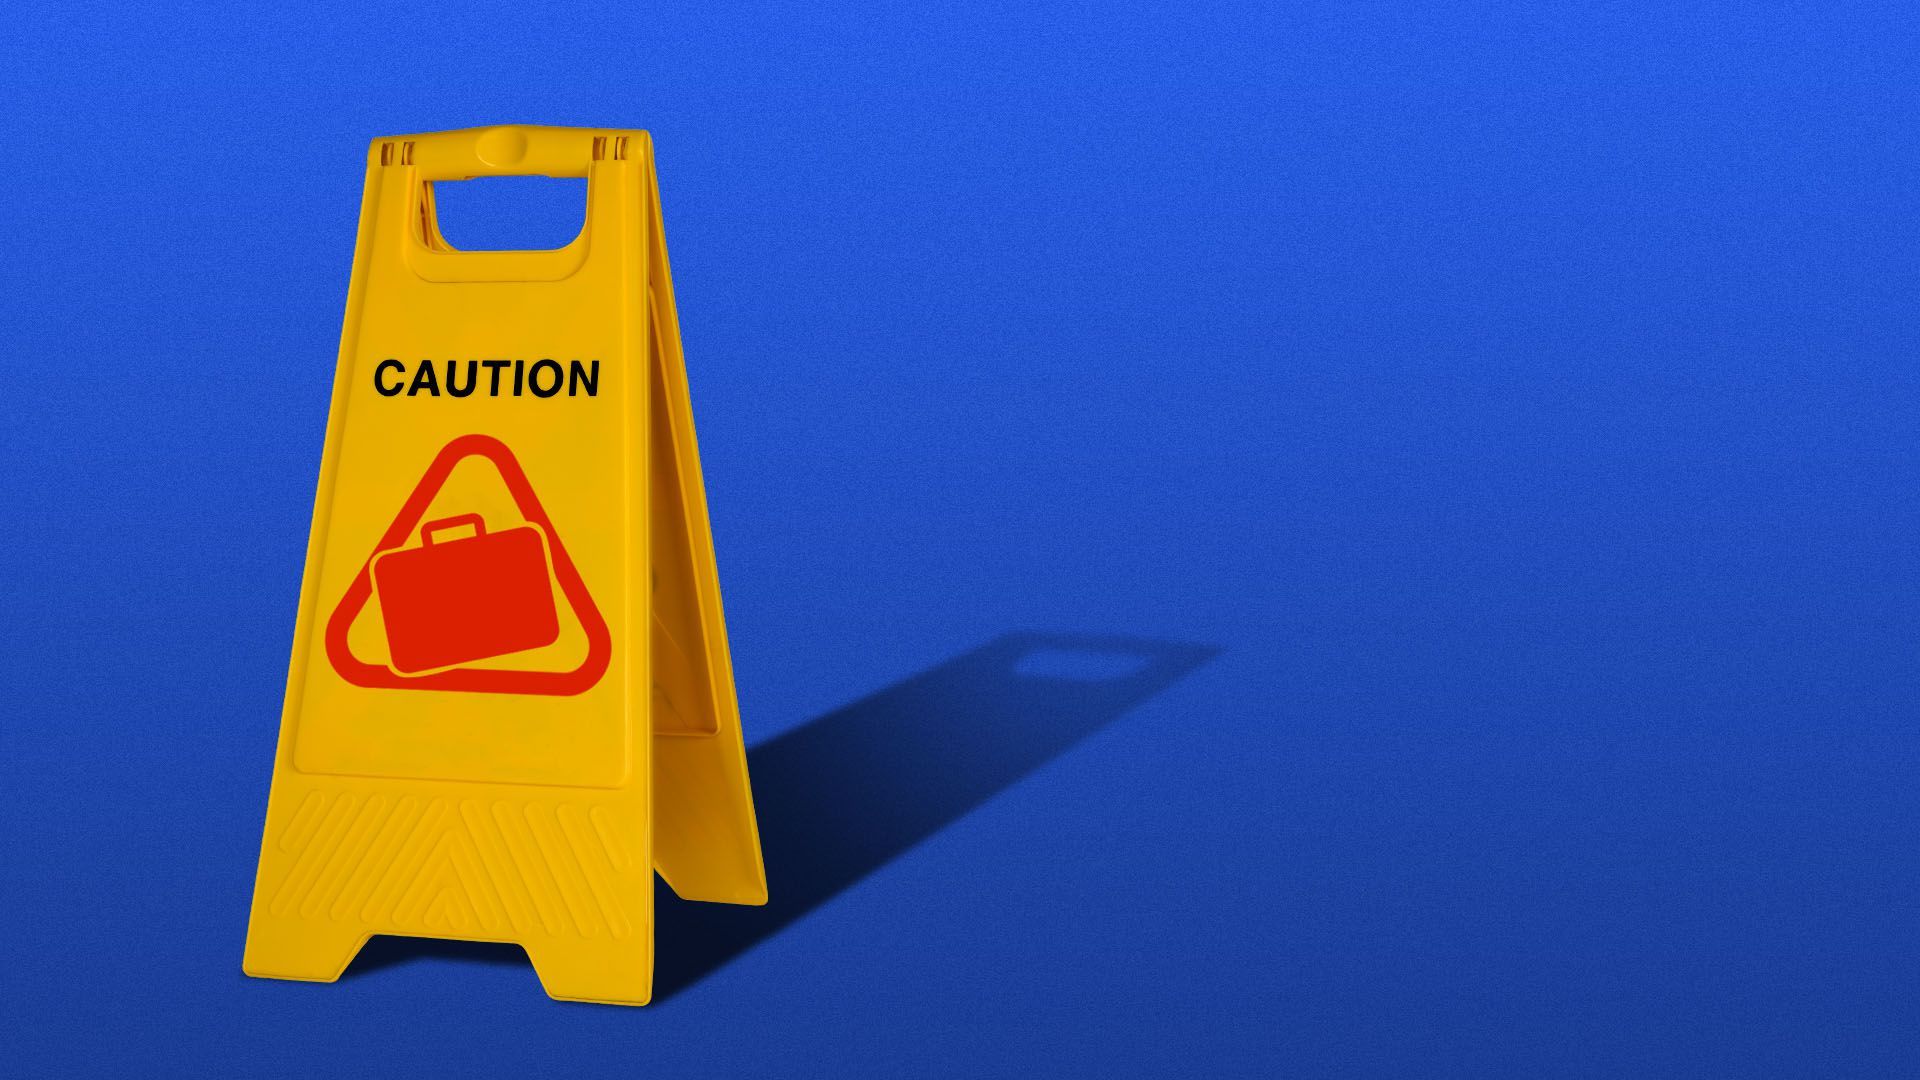 Illustration of a caution sign with a briefcase icon 